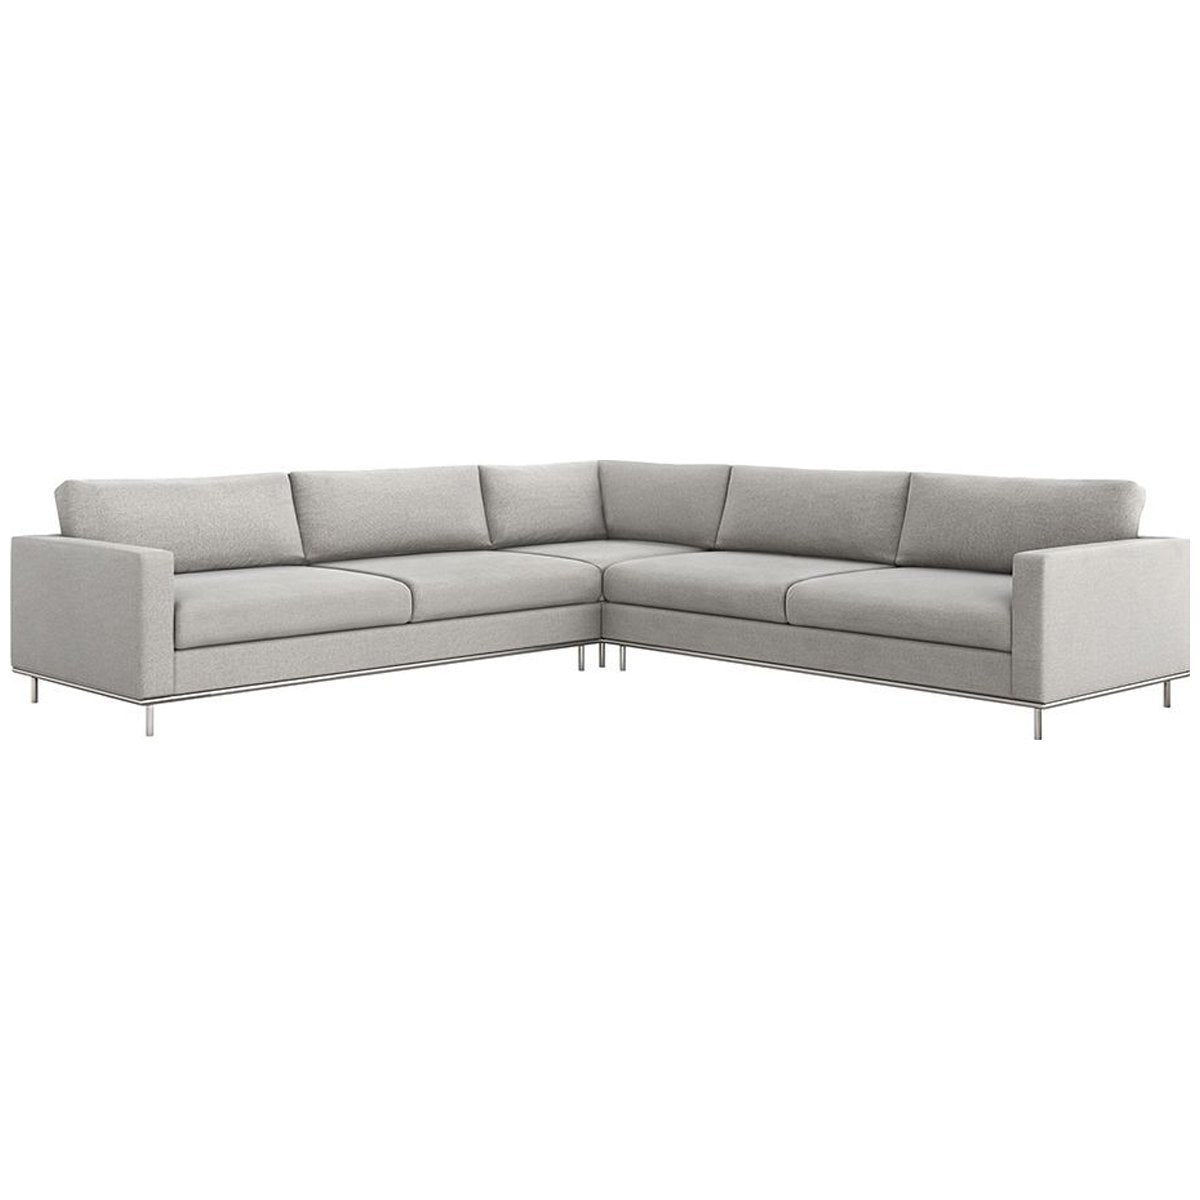 Interlude Home Valencia Sectional - Faux Linen